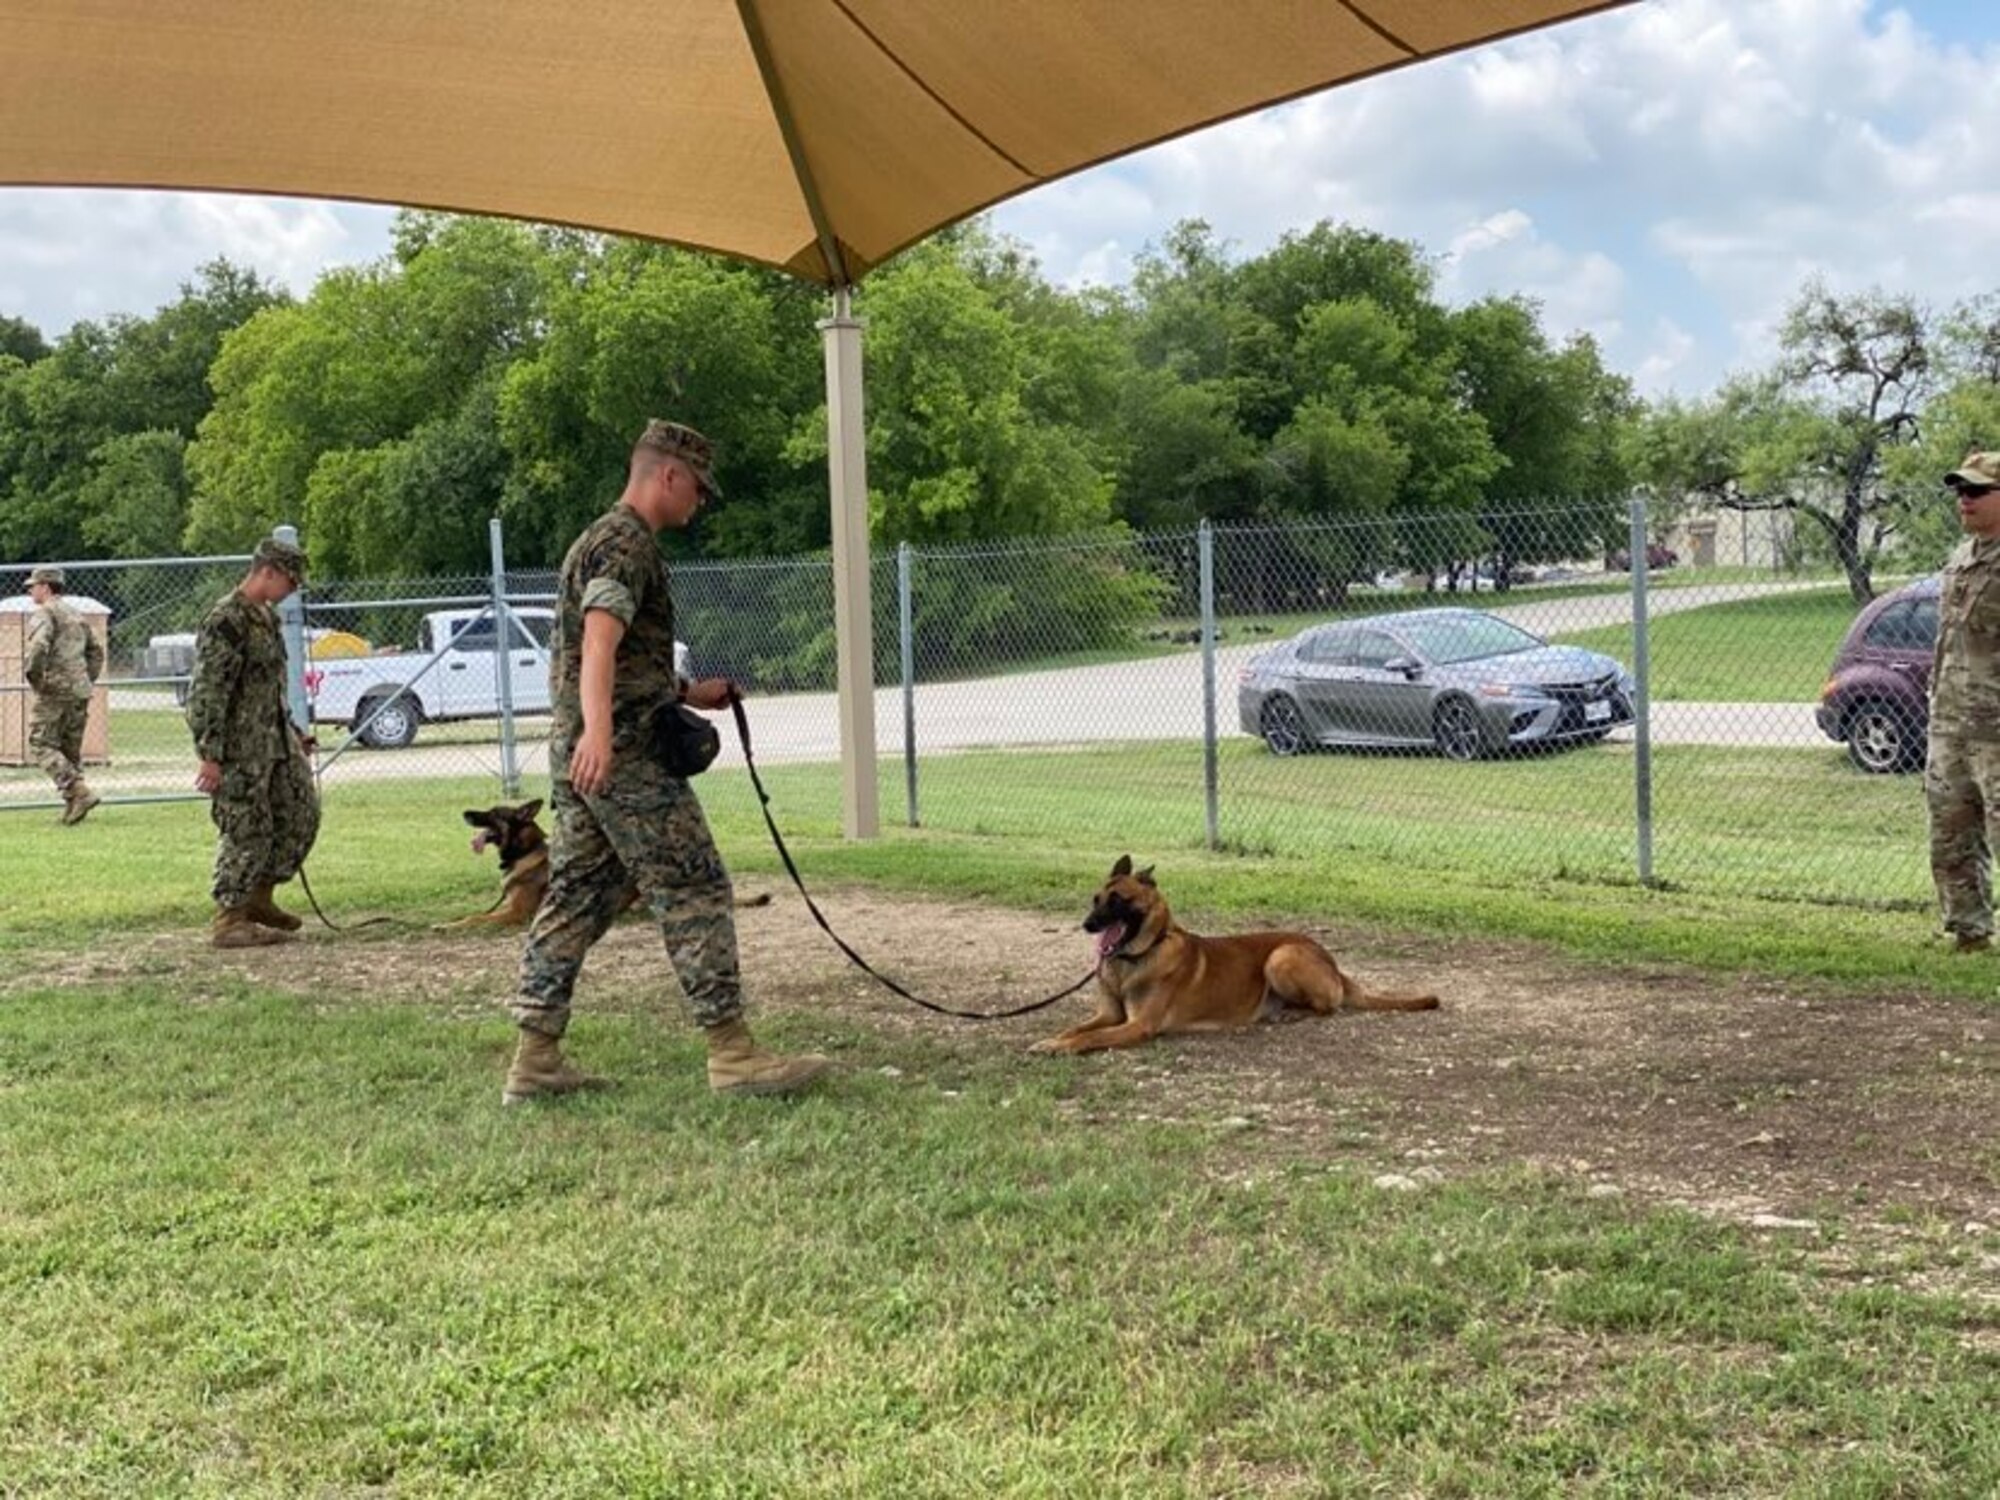 Military Working Dog handler training students from the Army, Air Force, Marine Corps and Navy lead a virtual K-9 demonstration for the Fair Oaks Rotary Club, June 3 2020 at Joint Base San Antonio-Lackland, Texas.